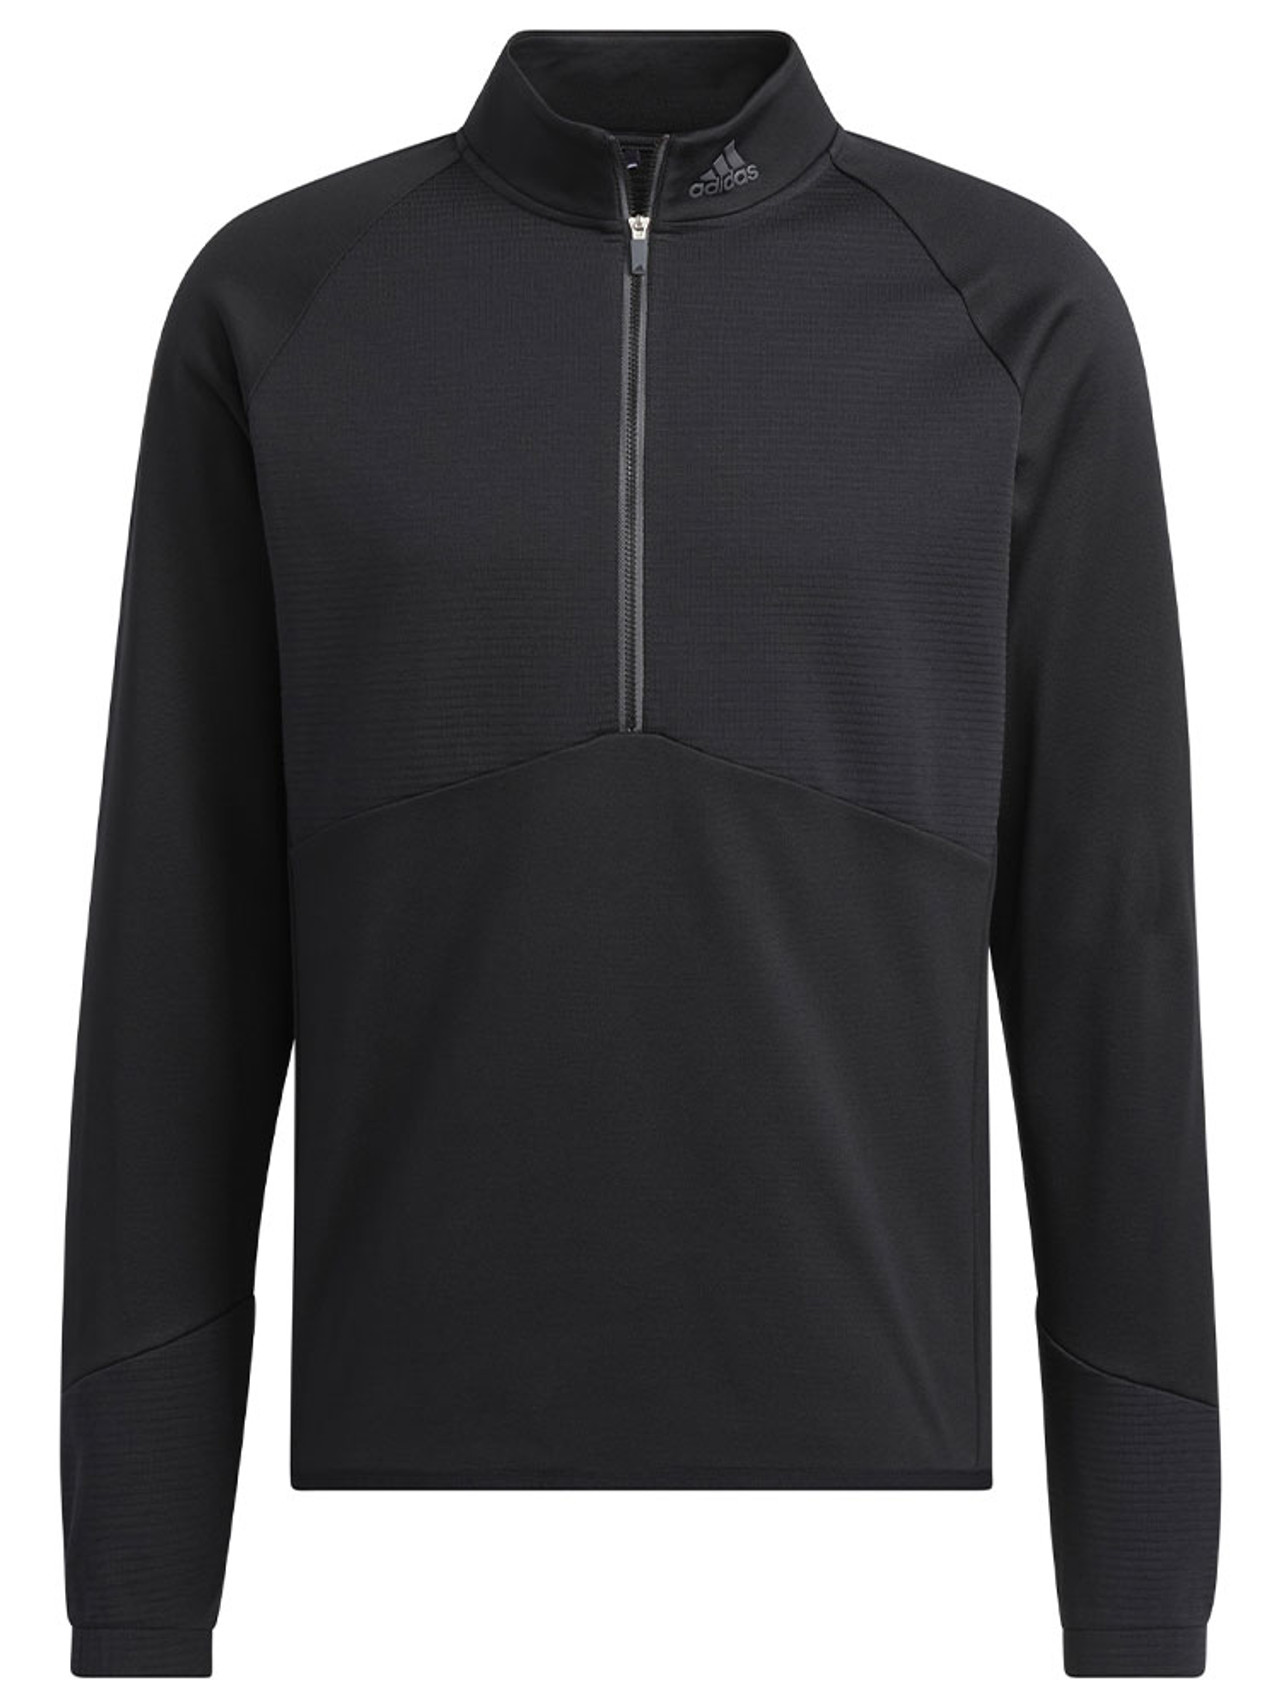 Golf Jumpers for Sale - Buy Golf Jackets Online | GolfBox